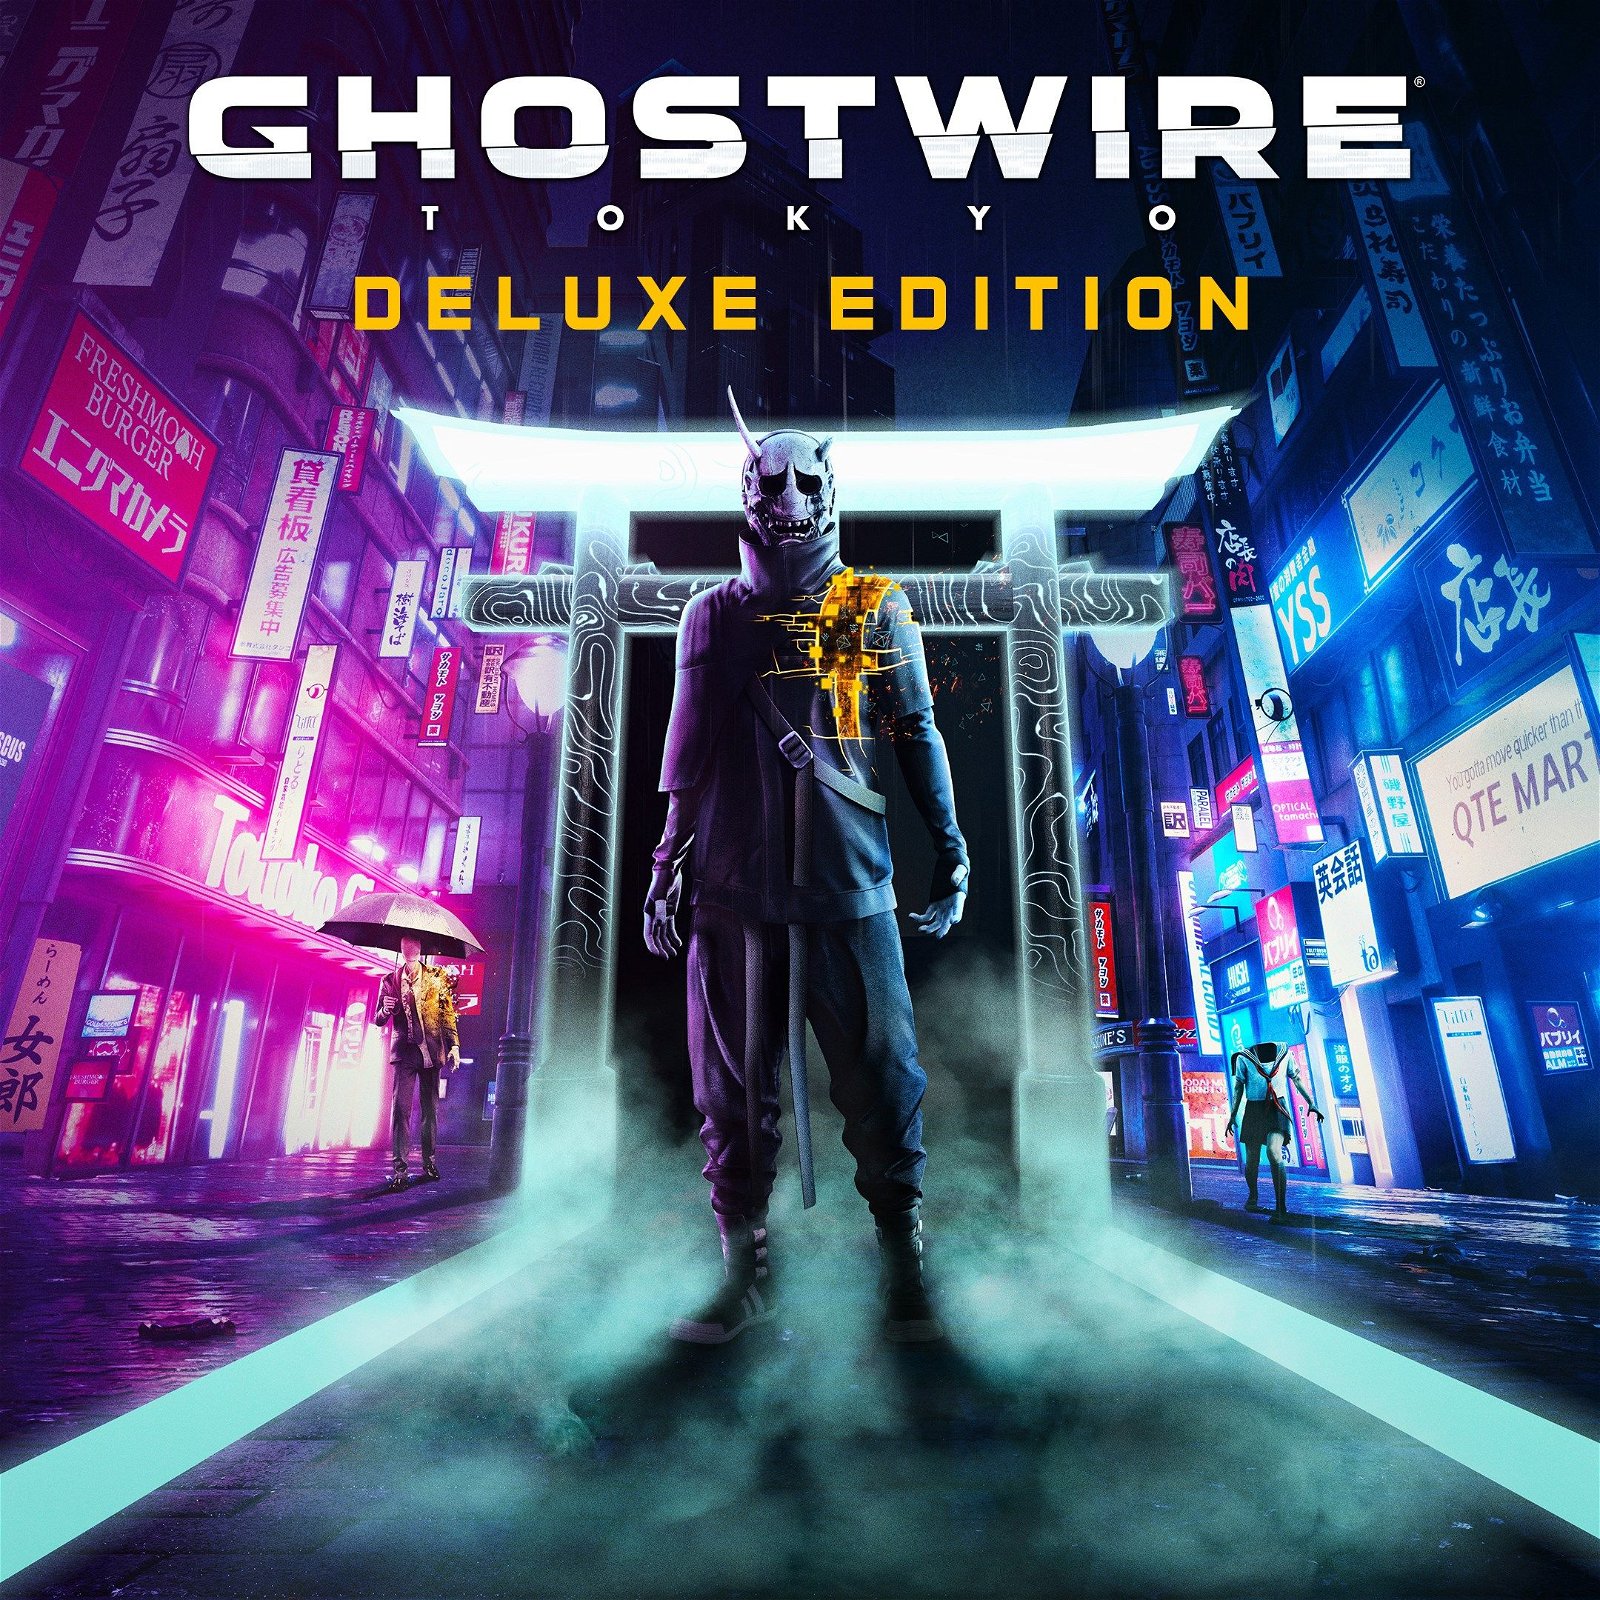 Image of Ghostwire: Tokyo Deluxe Edition